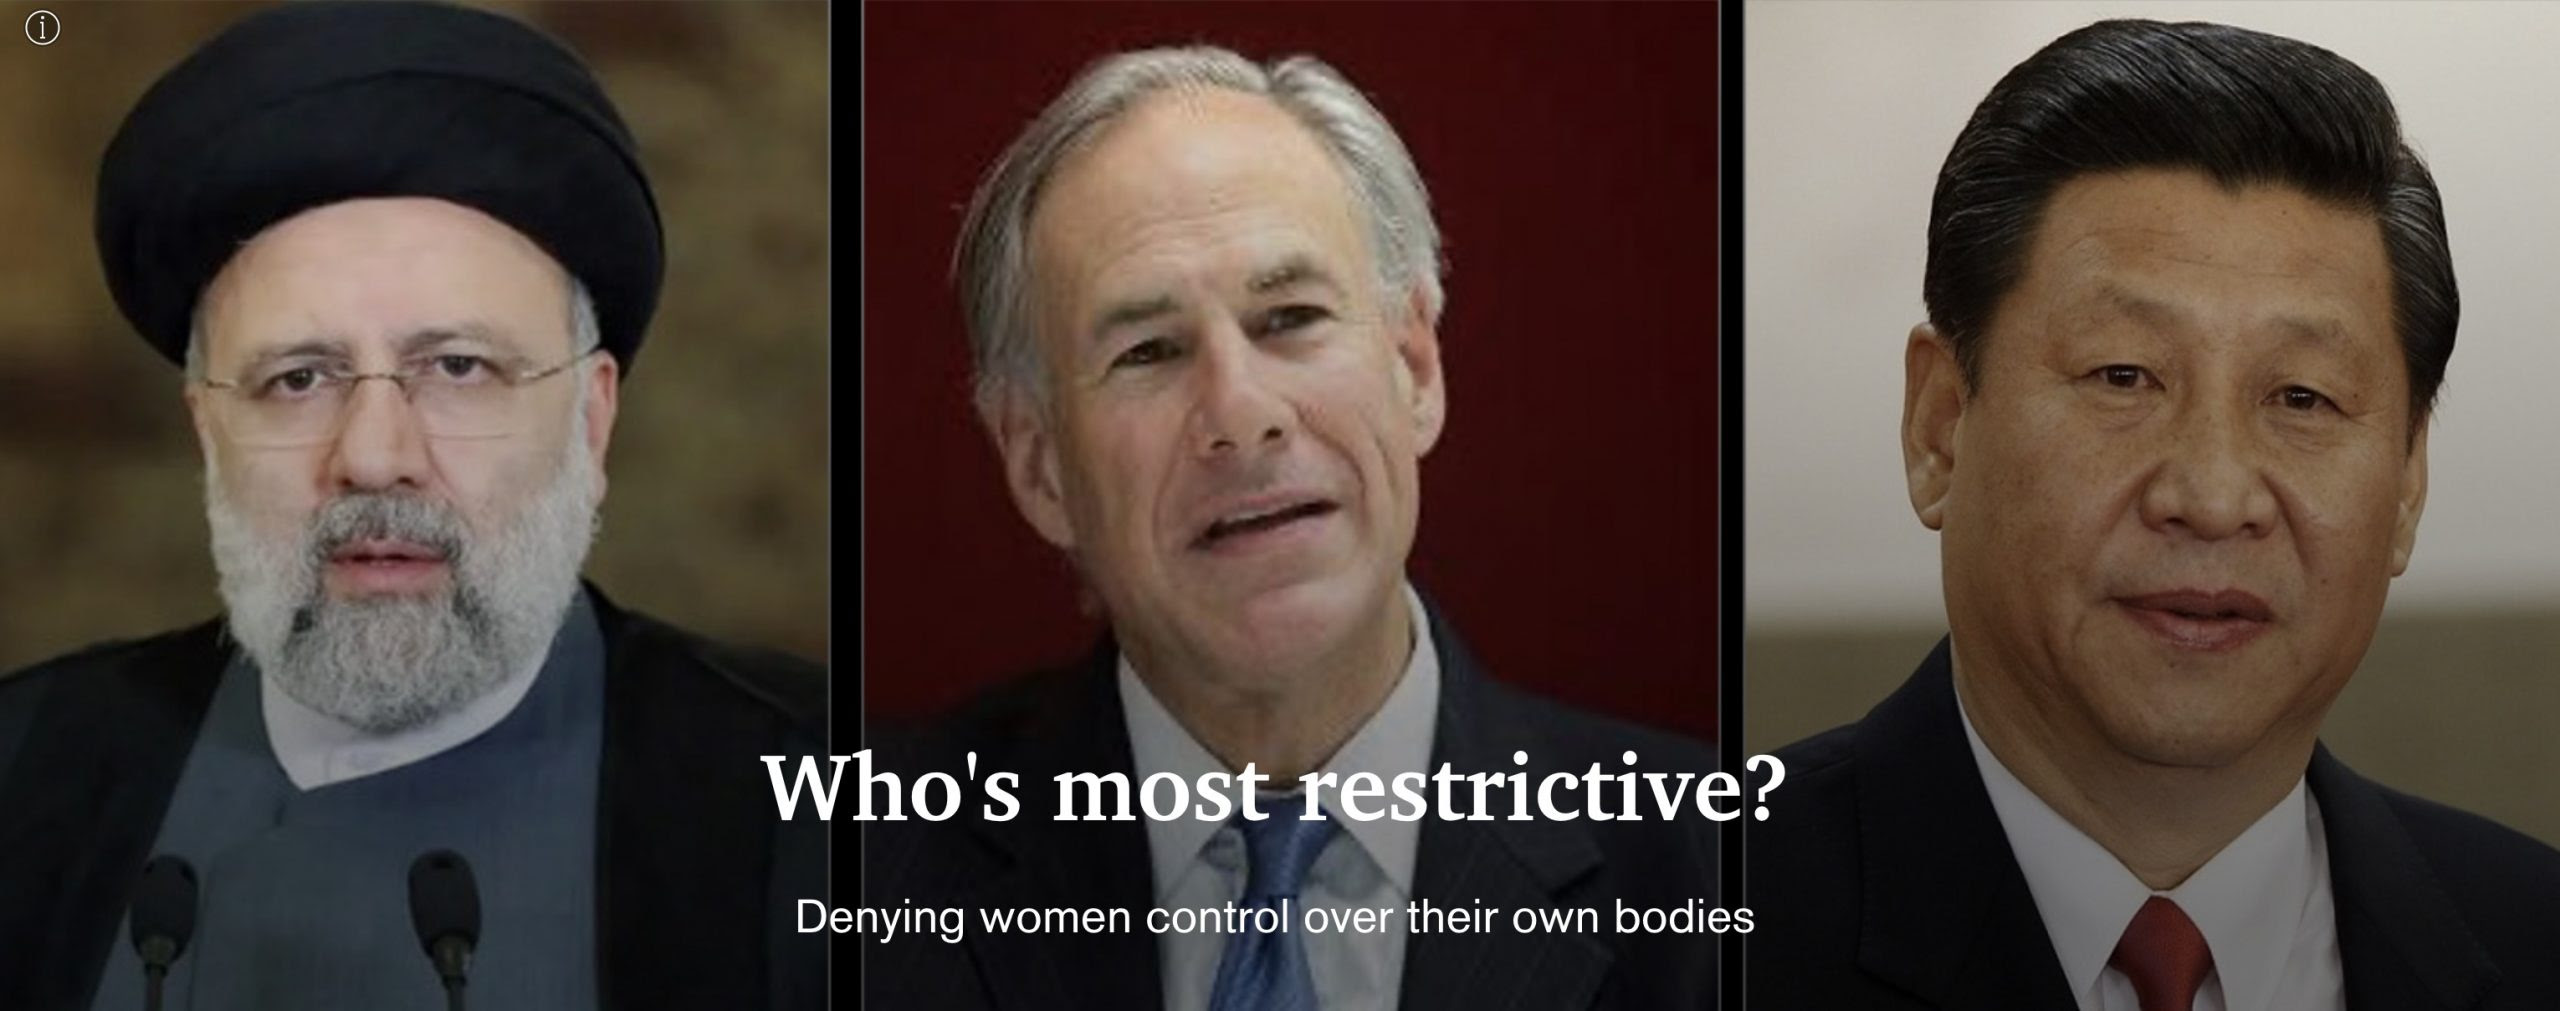 Republicans deny women reproductive health putting America behind even Iran and China.